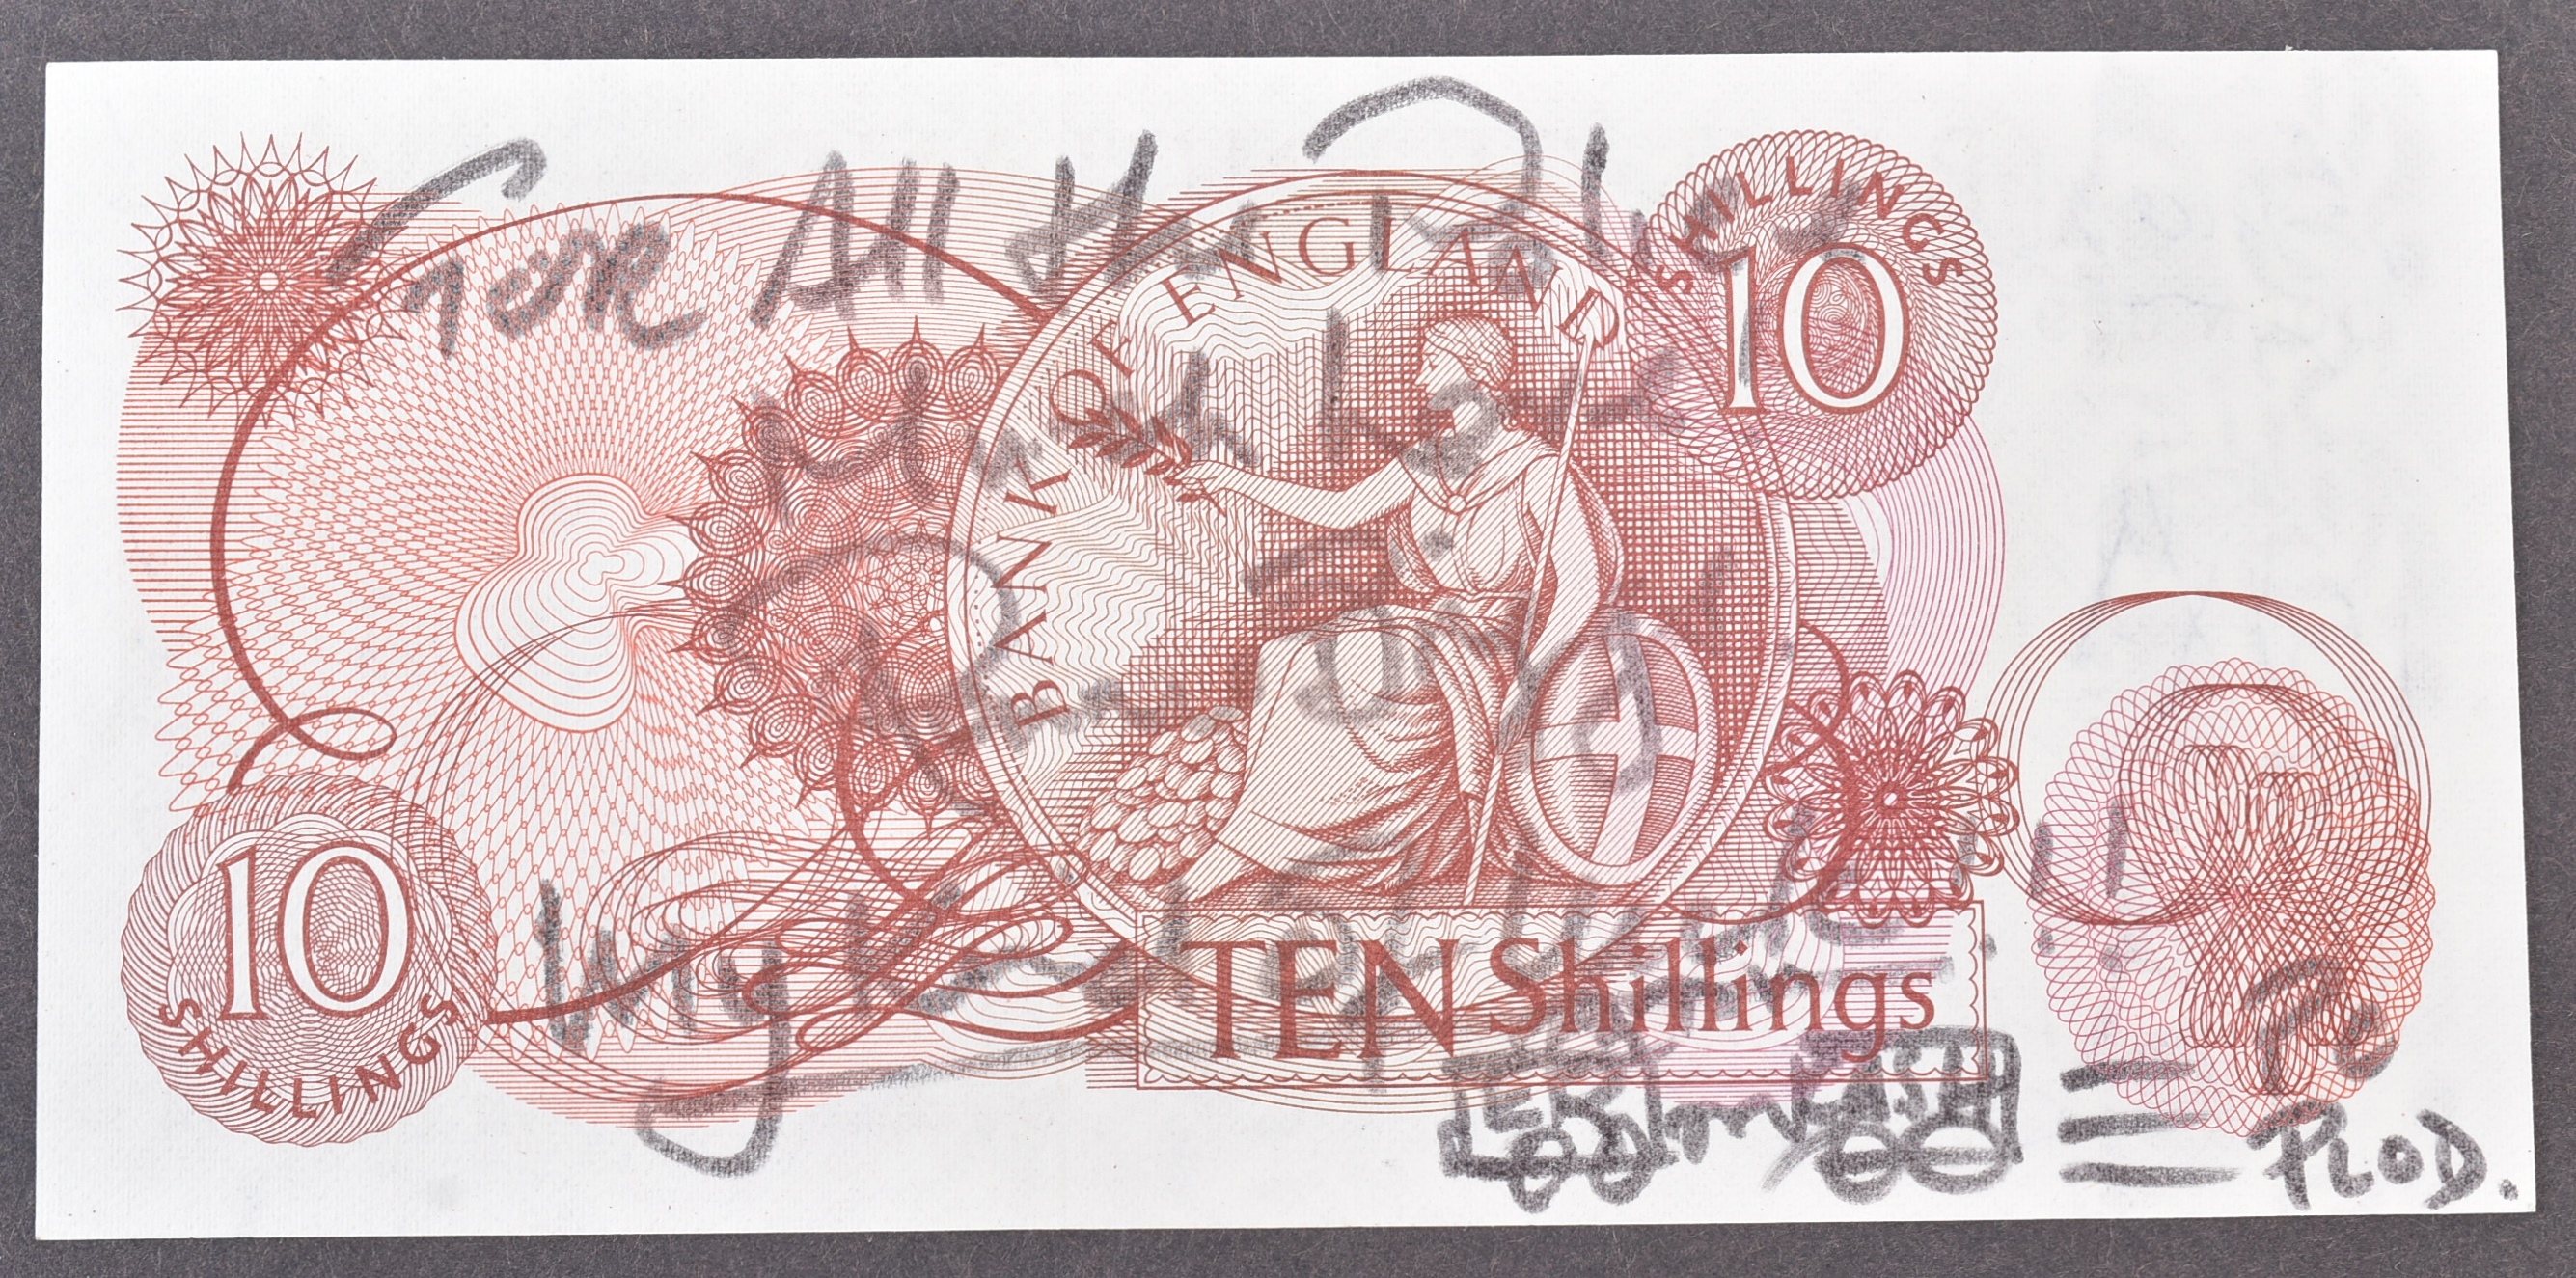 THE GREAT TRAIN ROBBERY - MULTI-SIGNED BANK NOTE - Image 2 of 2